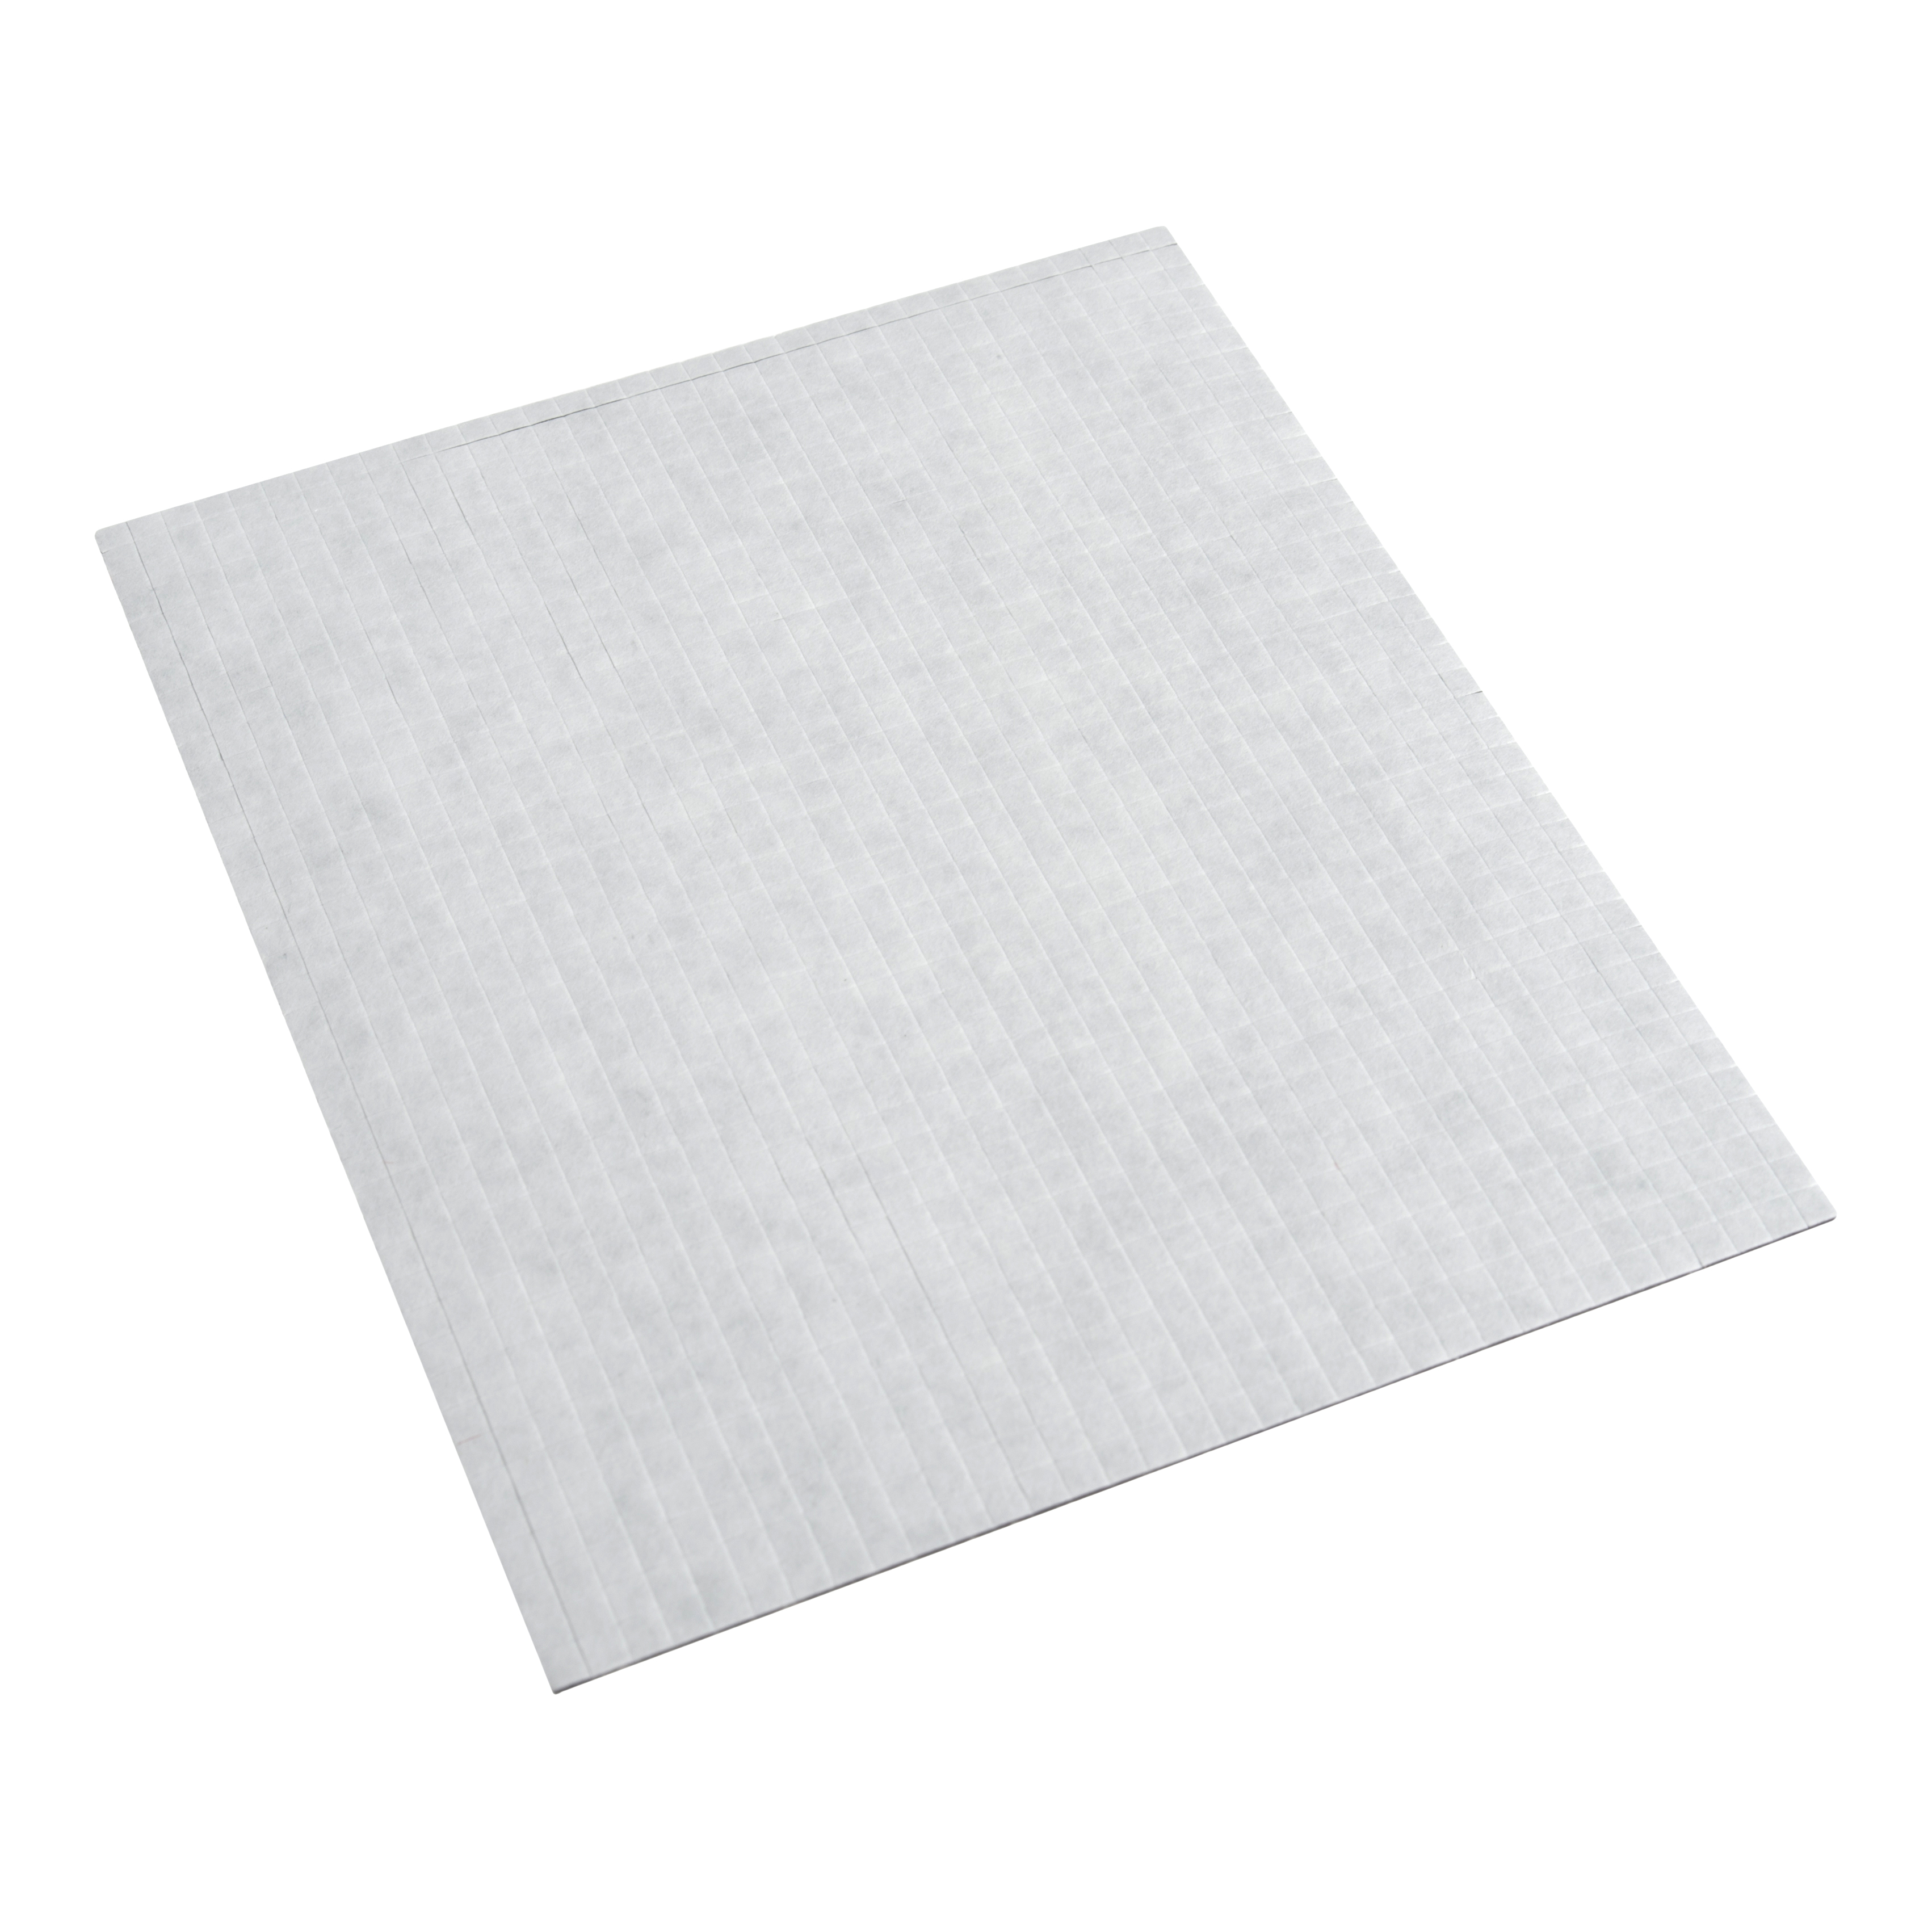 Picture of Adhesive: Hi-Tack 1mm Foam Pads: 3x3mm Square: White (10)